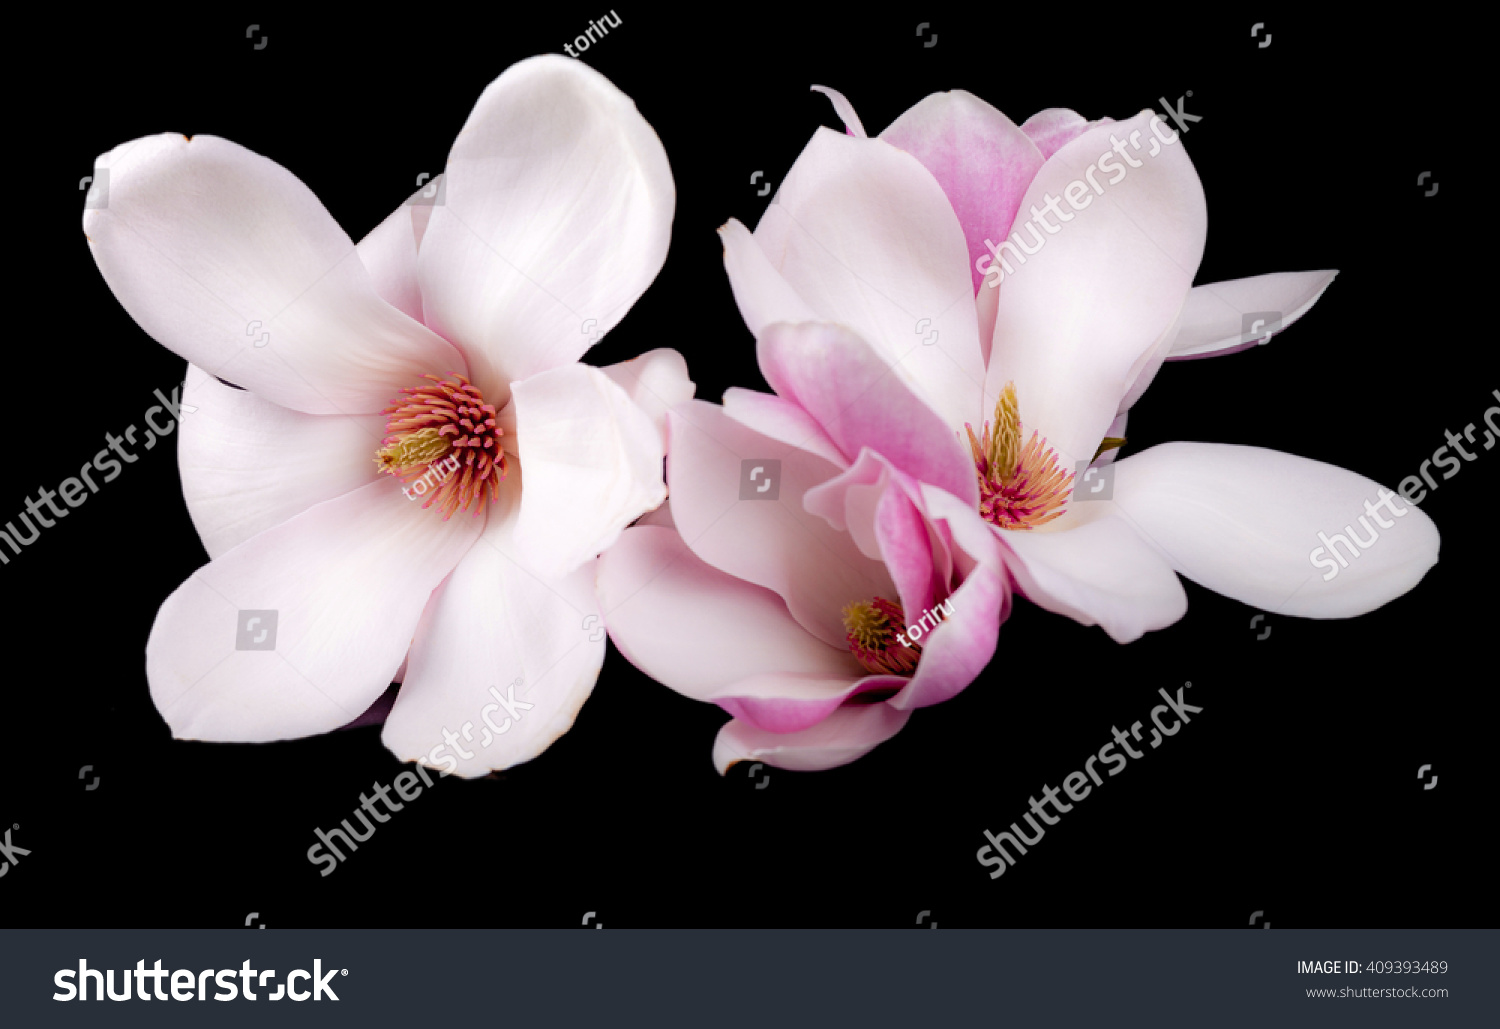 Blooming Magnolia Flowers Isolated On Black Background Stock Photo